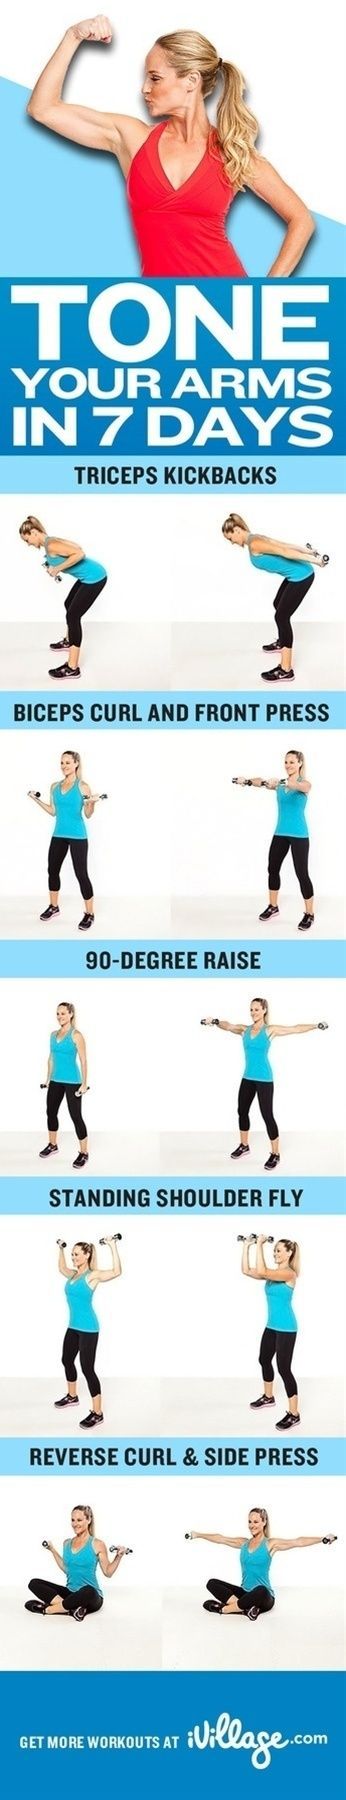 Tone your arms in 7 days***